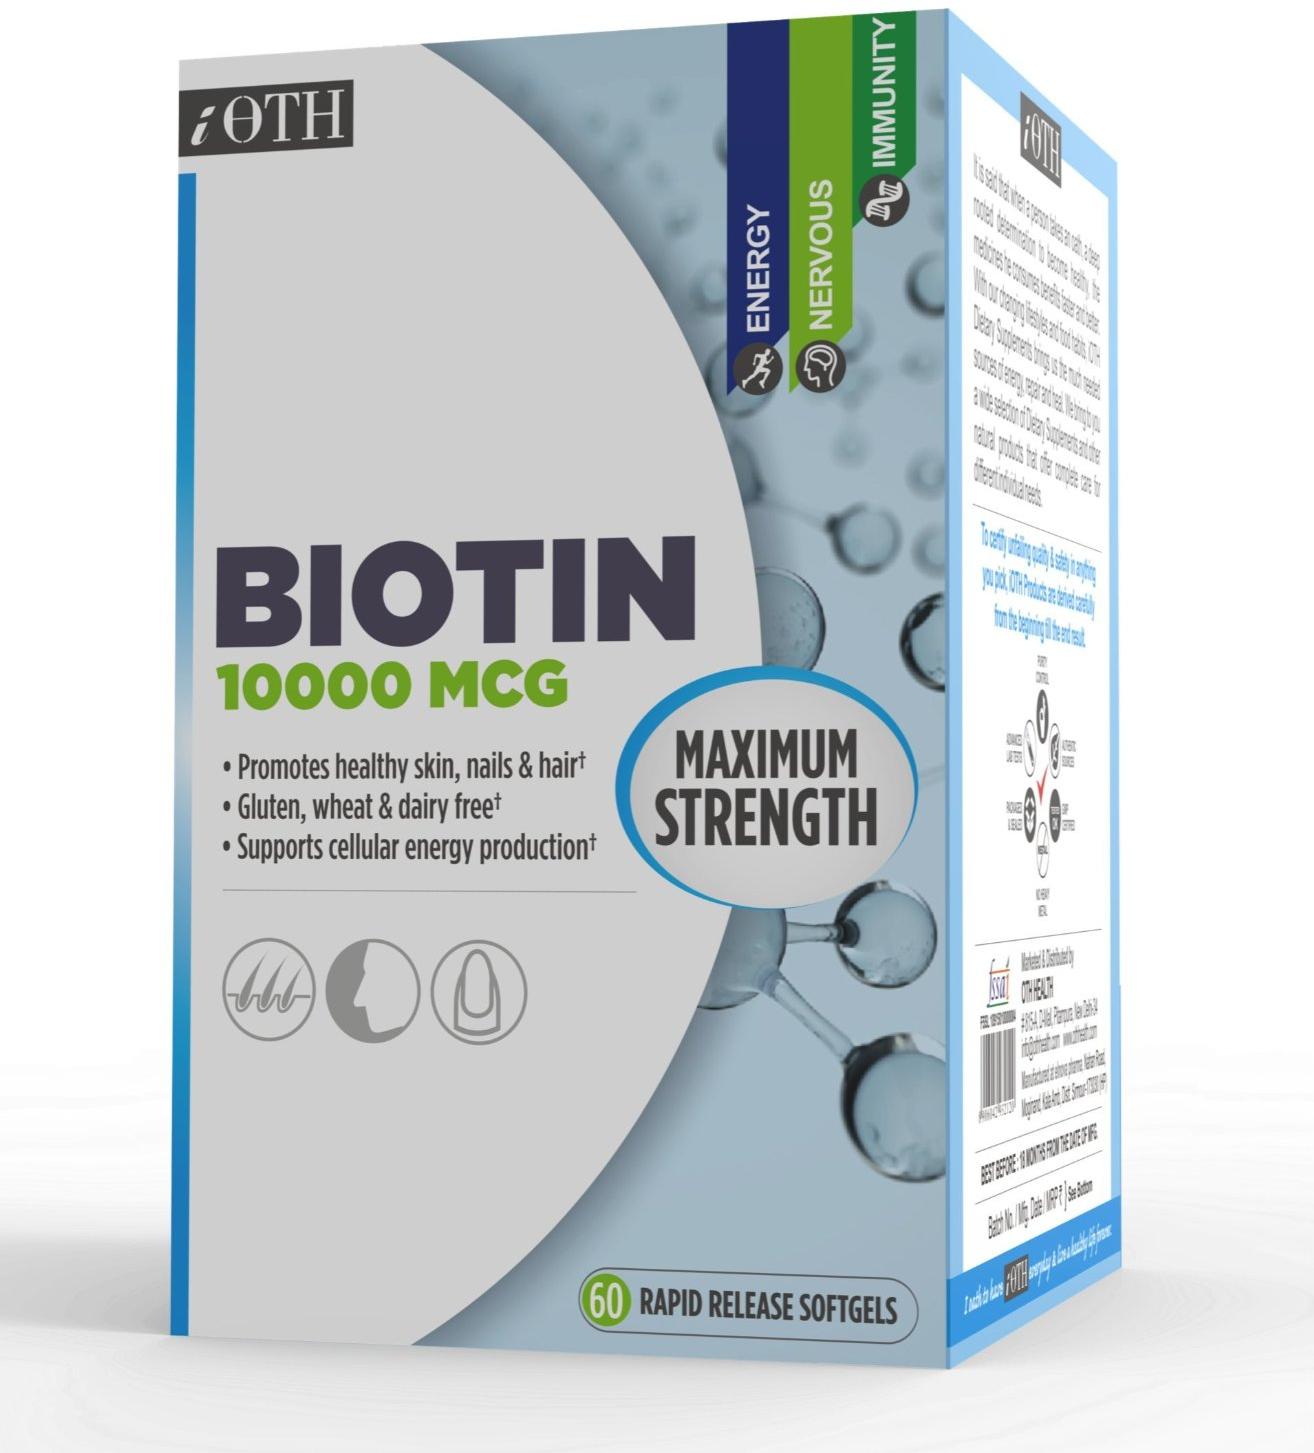 The Luxuriously Hydrating iOTH Biotin Supplement